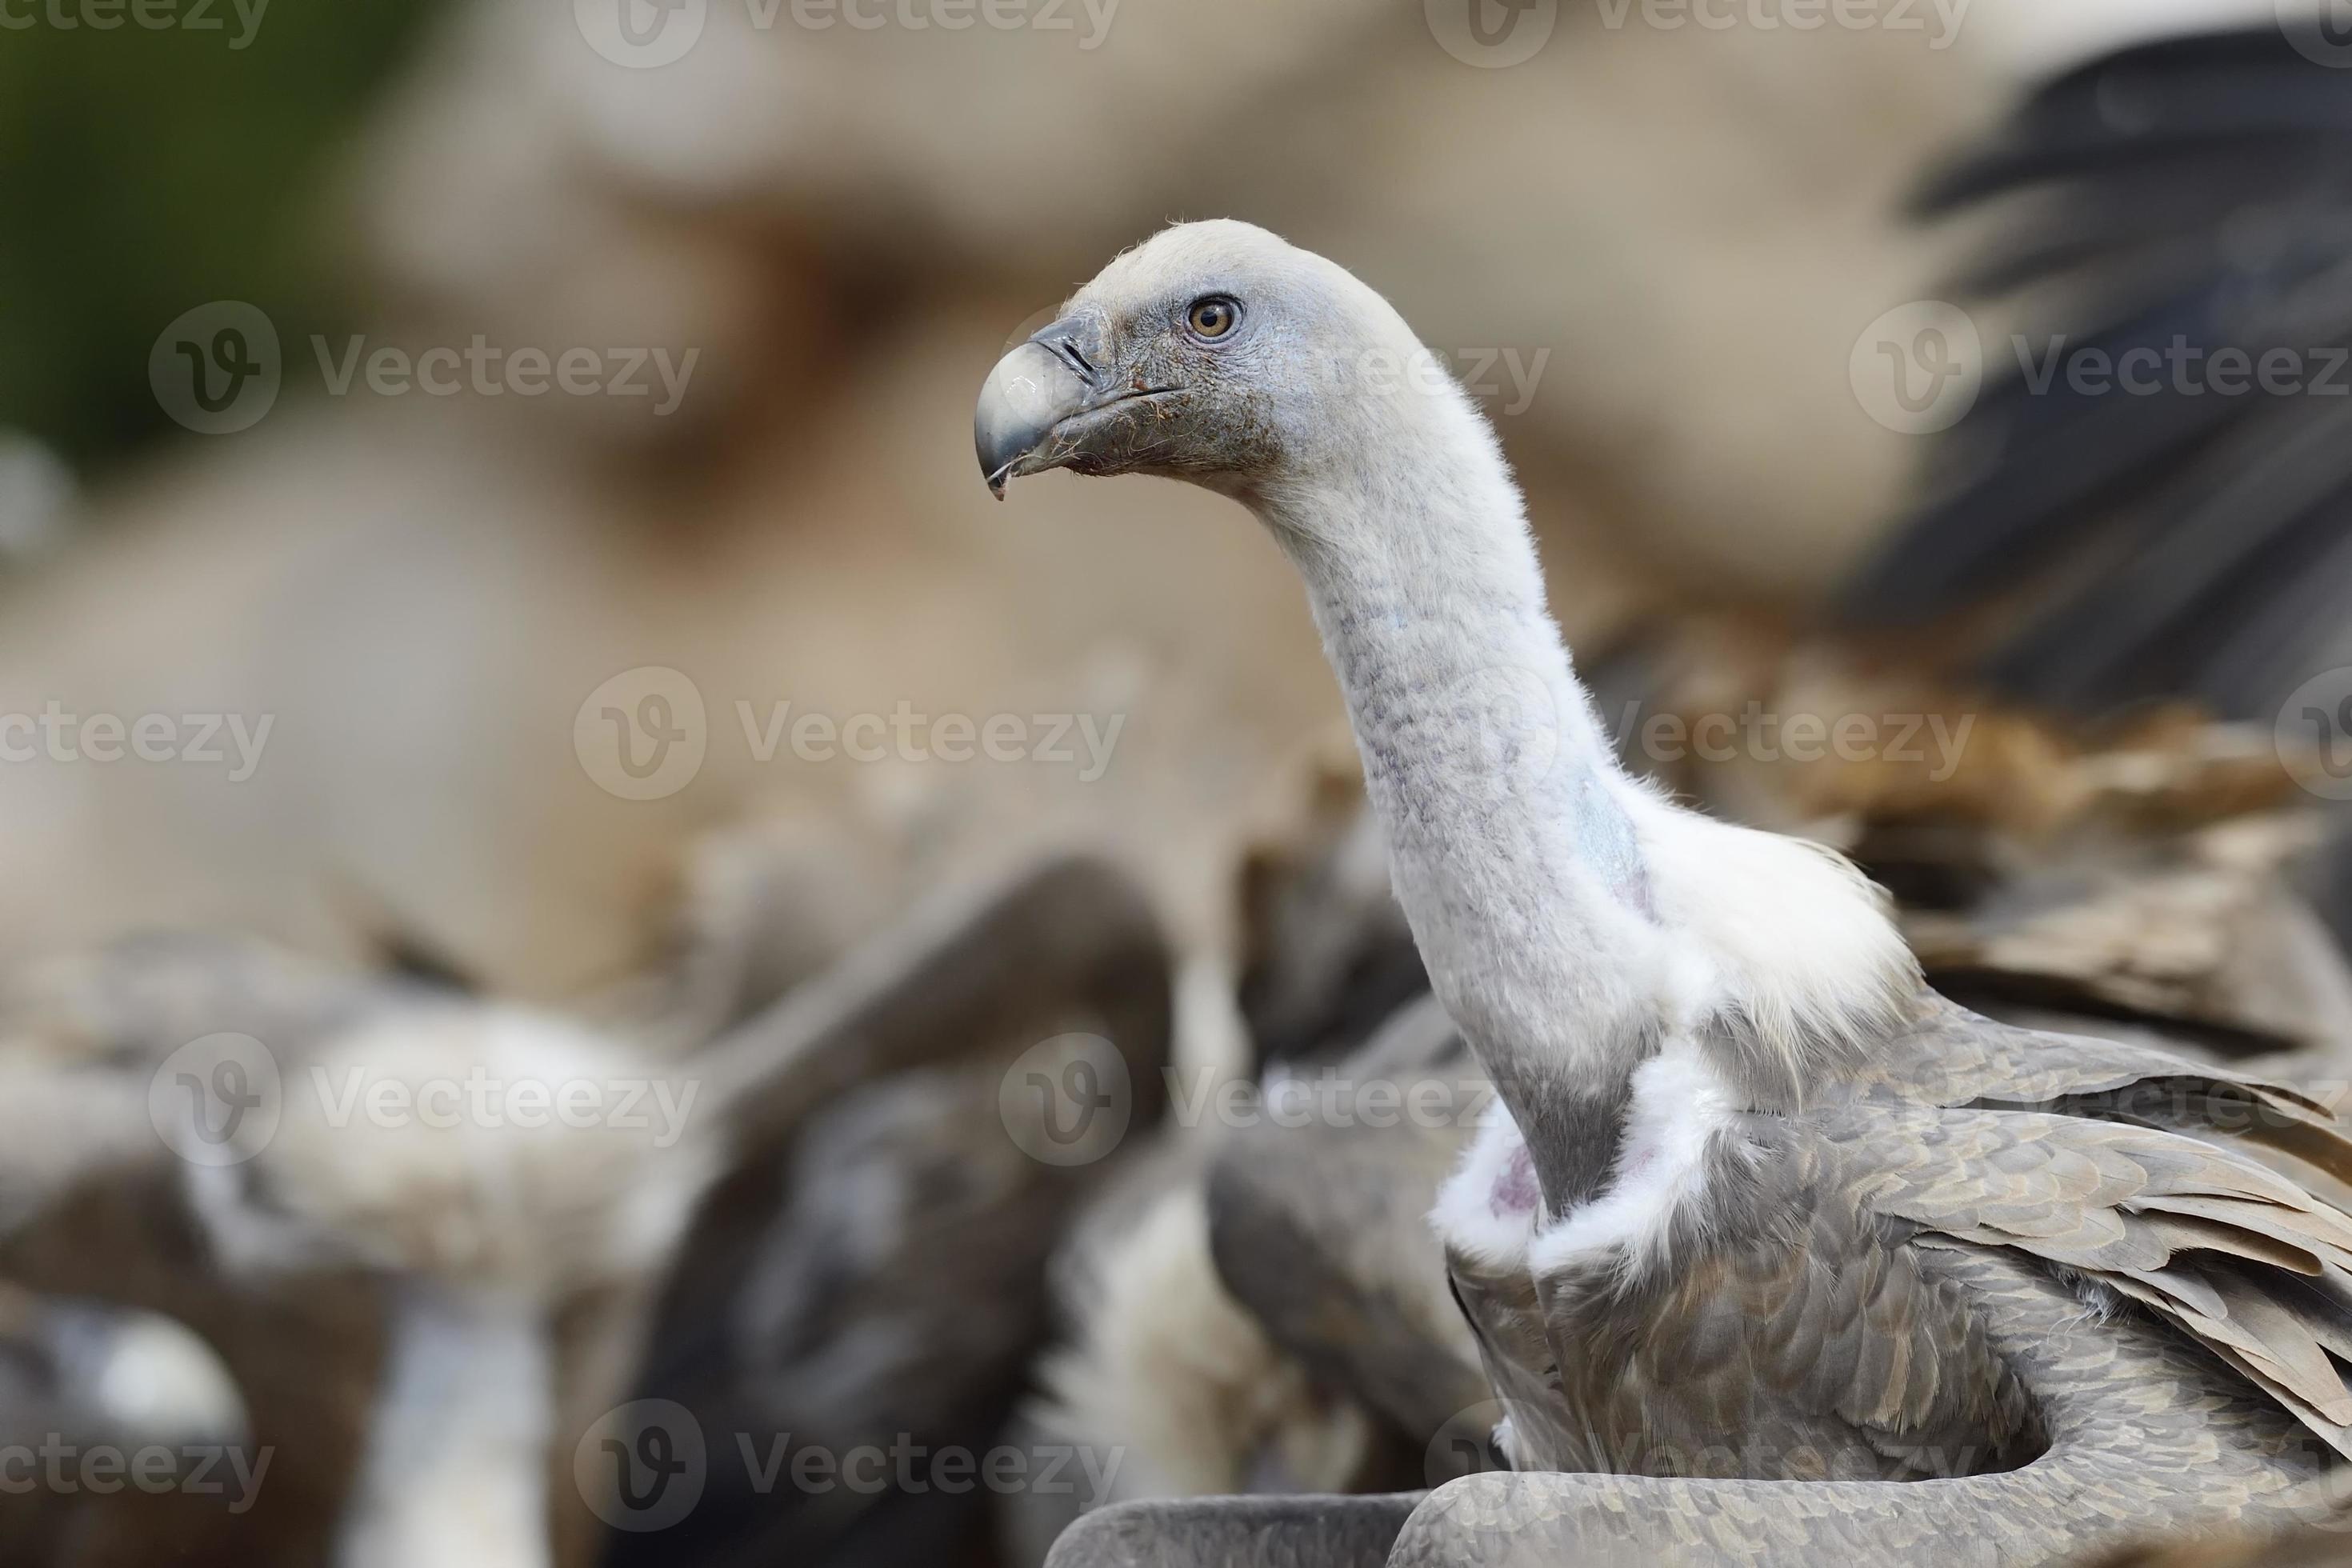 Griffon vulture portrait with others in background photo